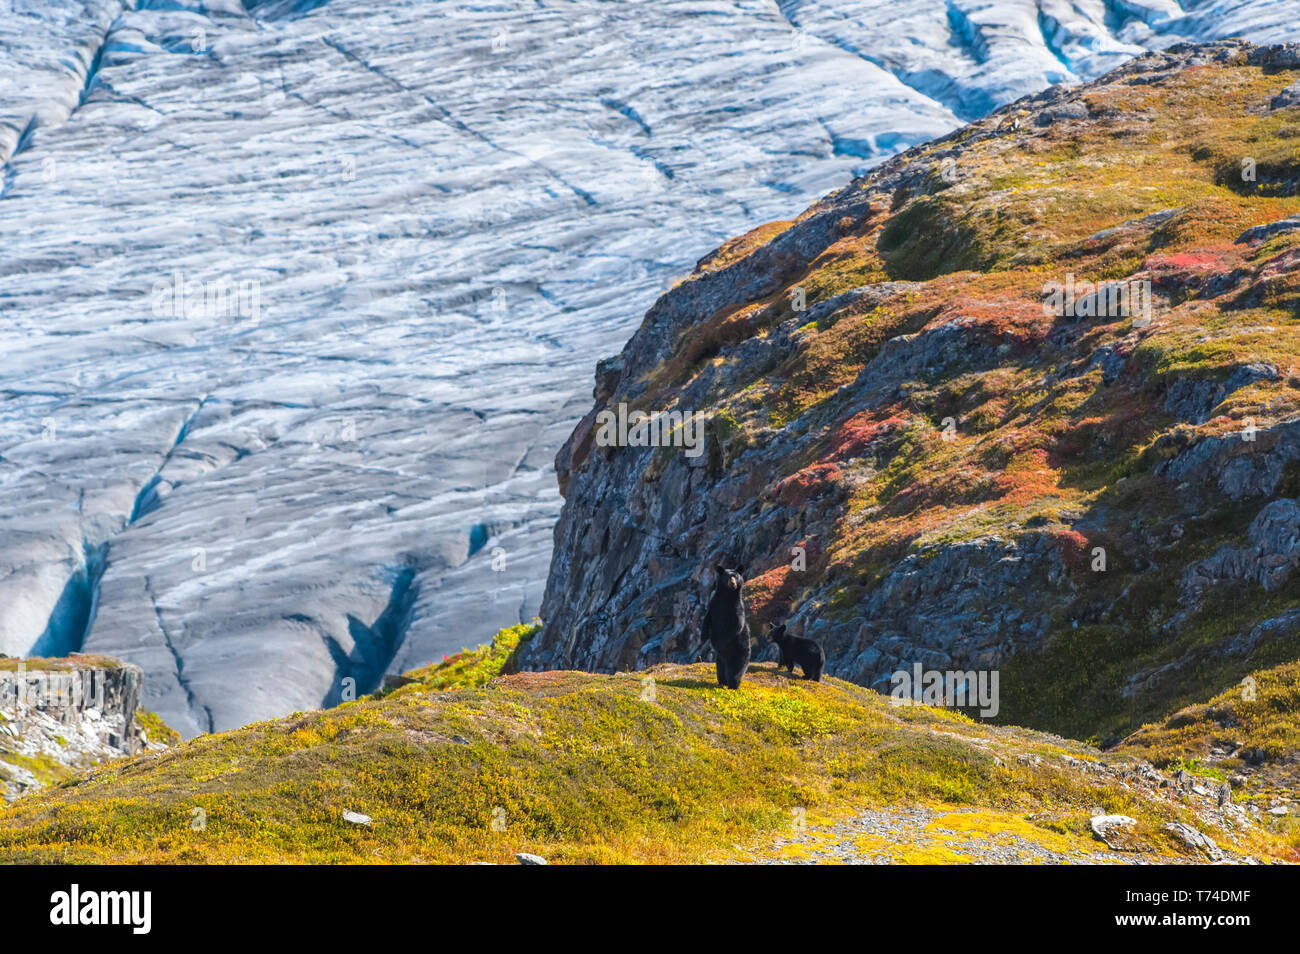 American black bear sow (Ursus americanus) is standing on her hind legs with her cub next to her on a hillside with Exit Glacier in the background ... Stock Photo